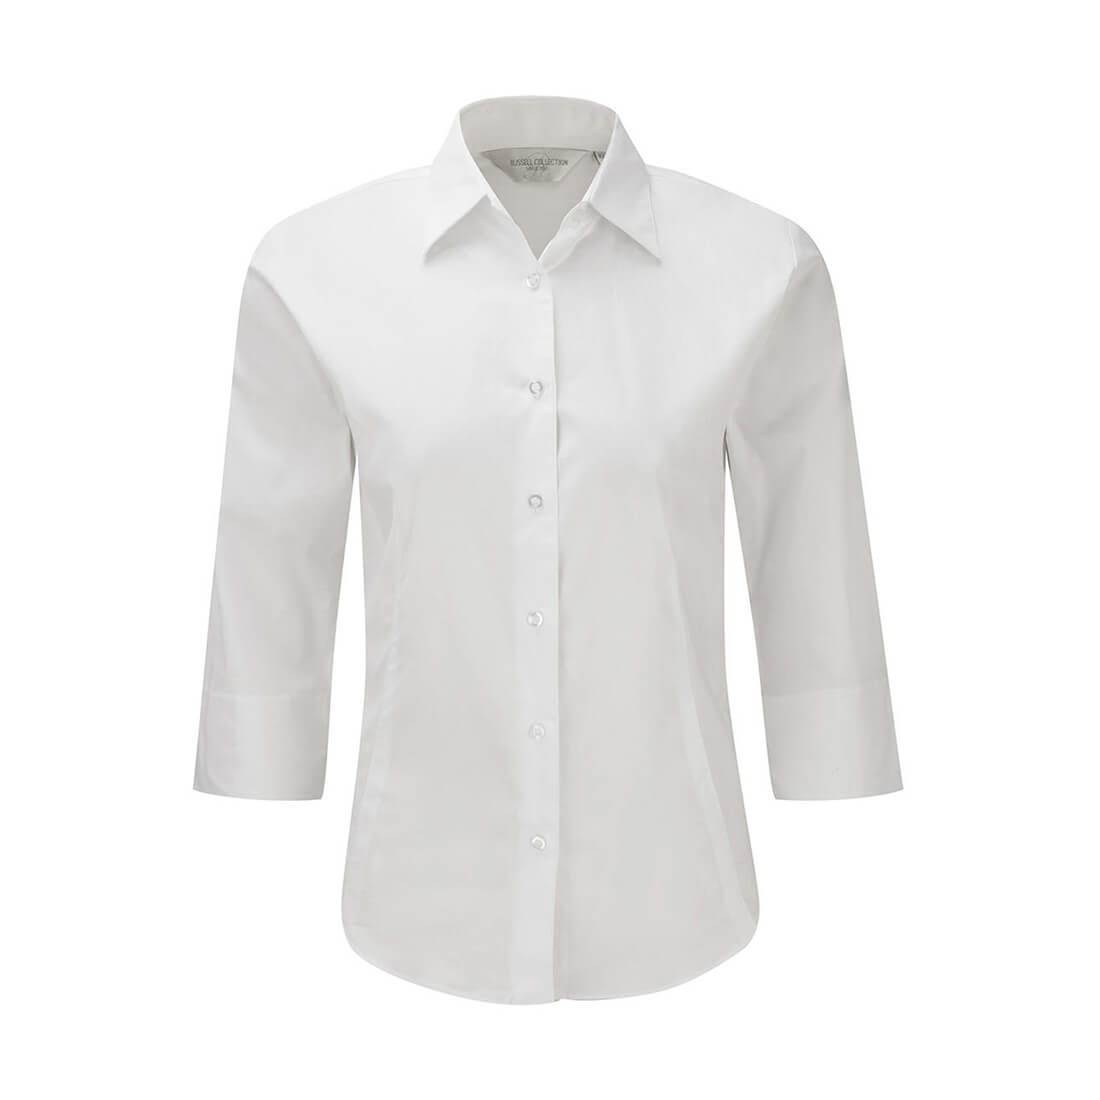 Fitted Blouse with 3/4 Sleeves - Les vêtements de protection